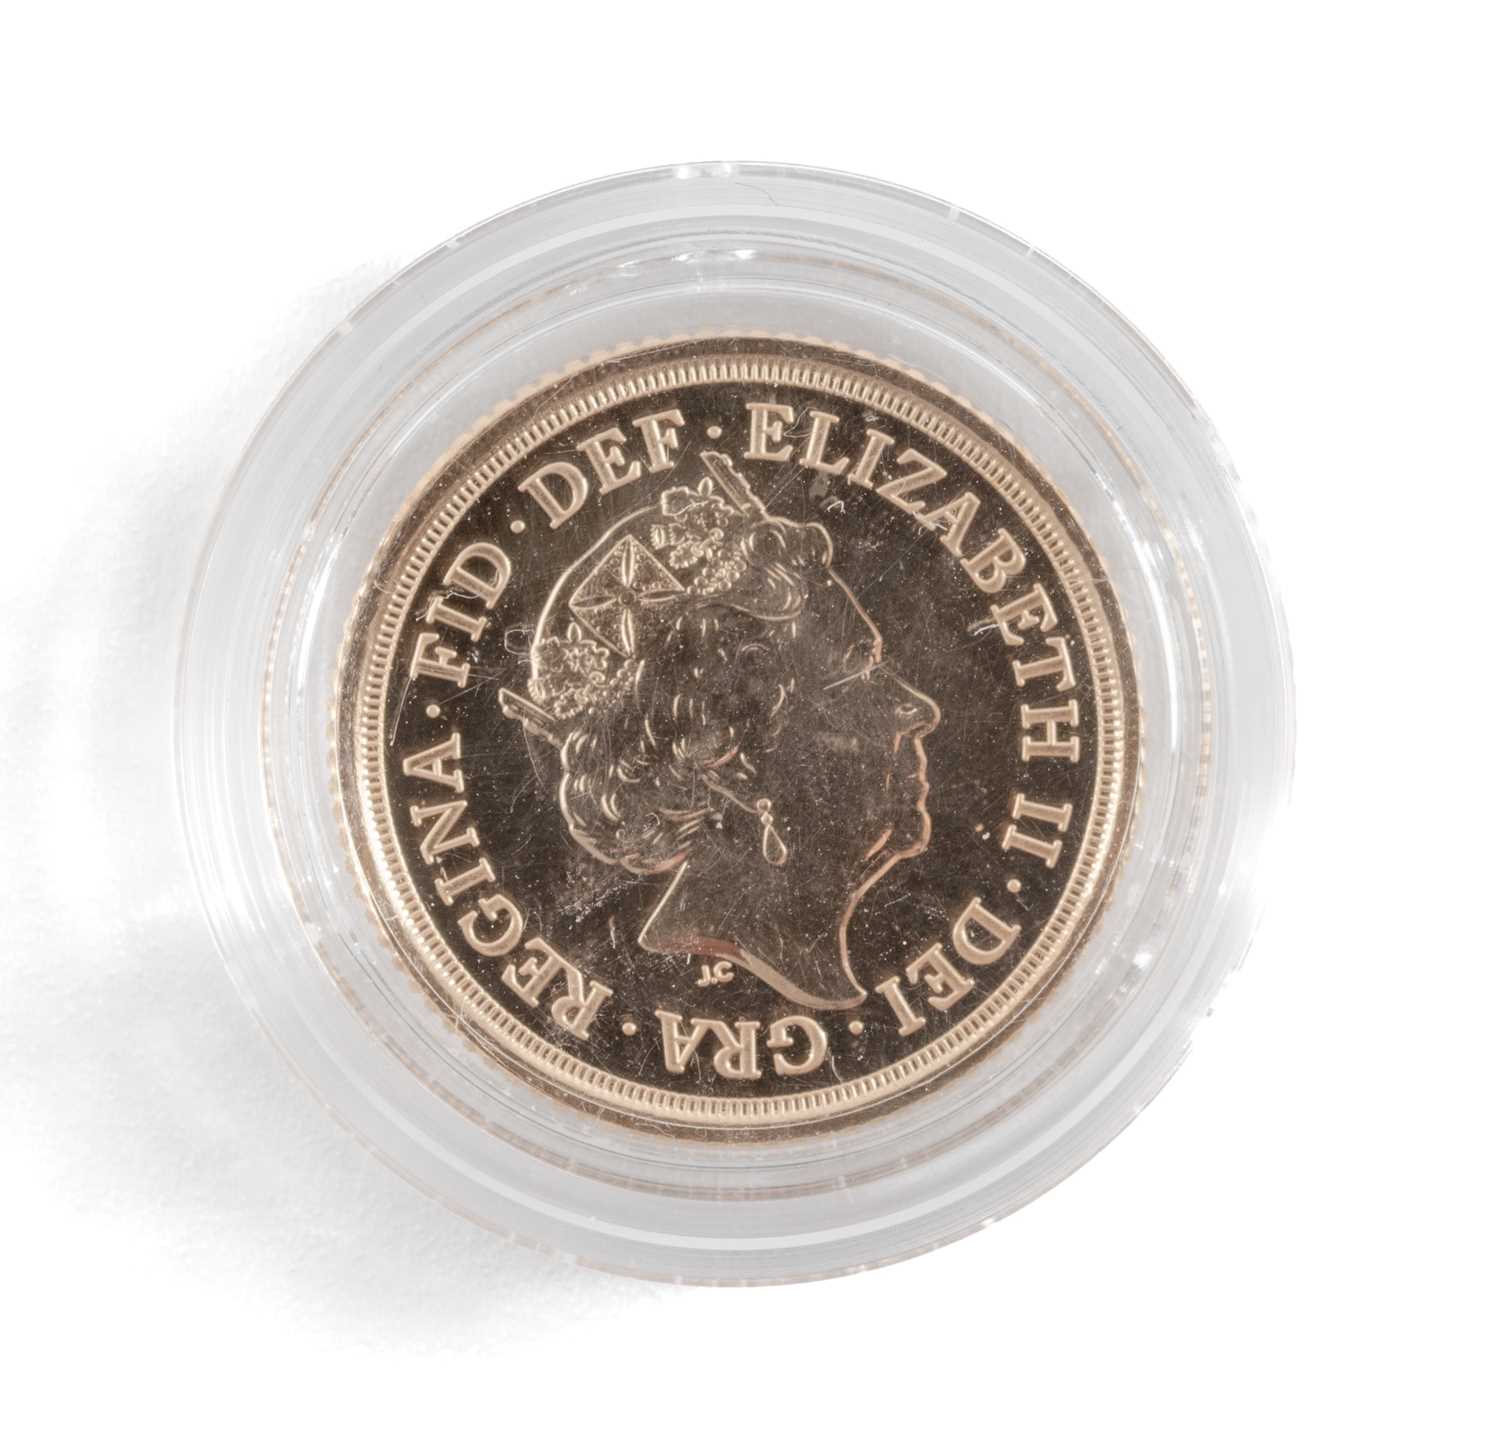 ELIZABETH II HALF SOVEREIGN, 2021, in capsule Provenance: private collection South Wales. - Image 2 of 2